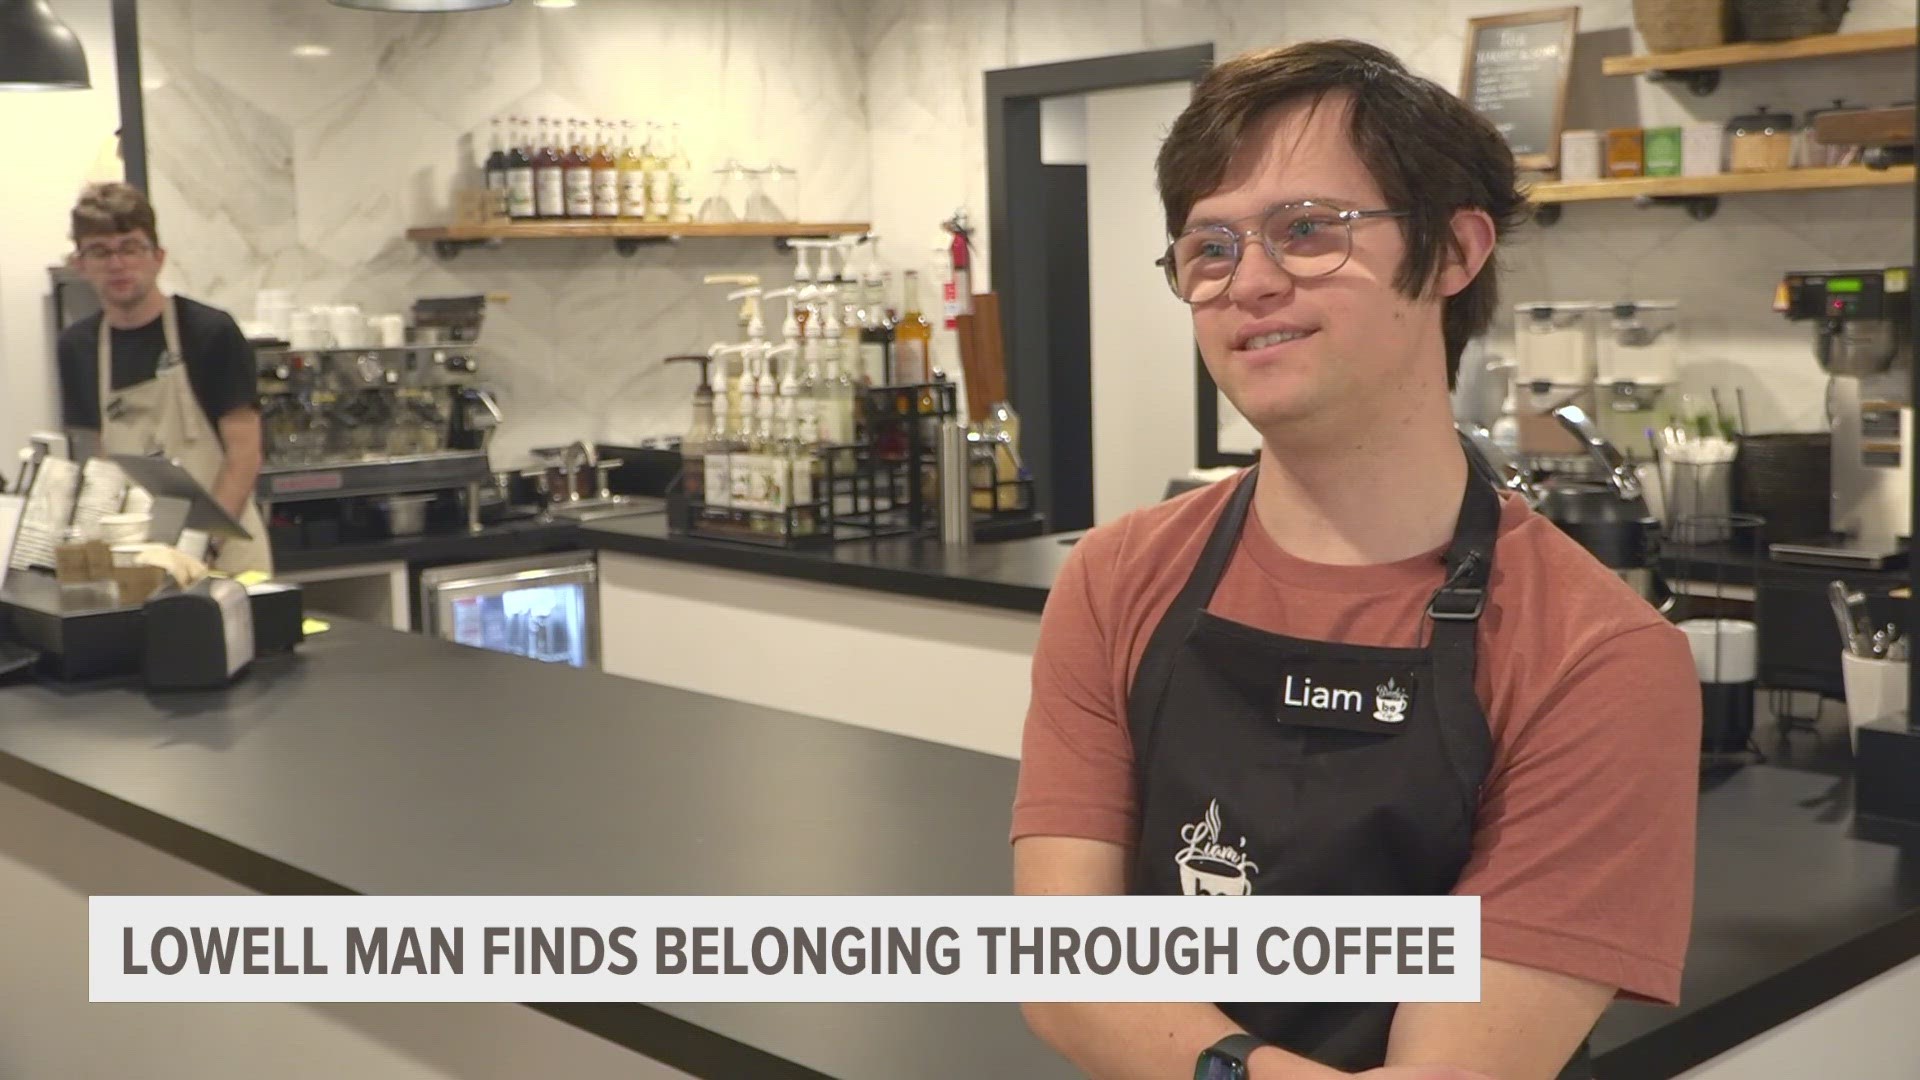 On a cold and rainy day, you might be looking for a bit of warmth. Look no further than a new café in Lowell, where a warm feeling is served with every order.